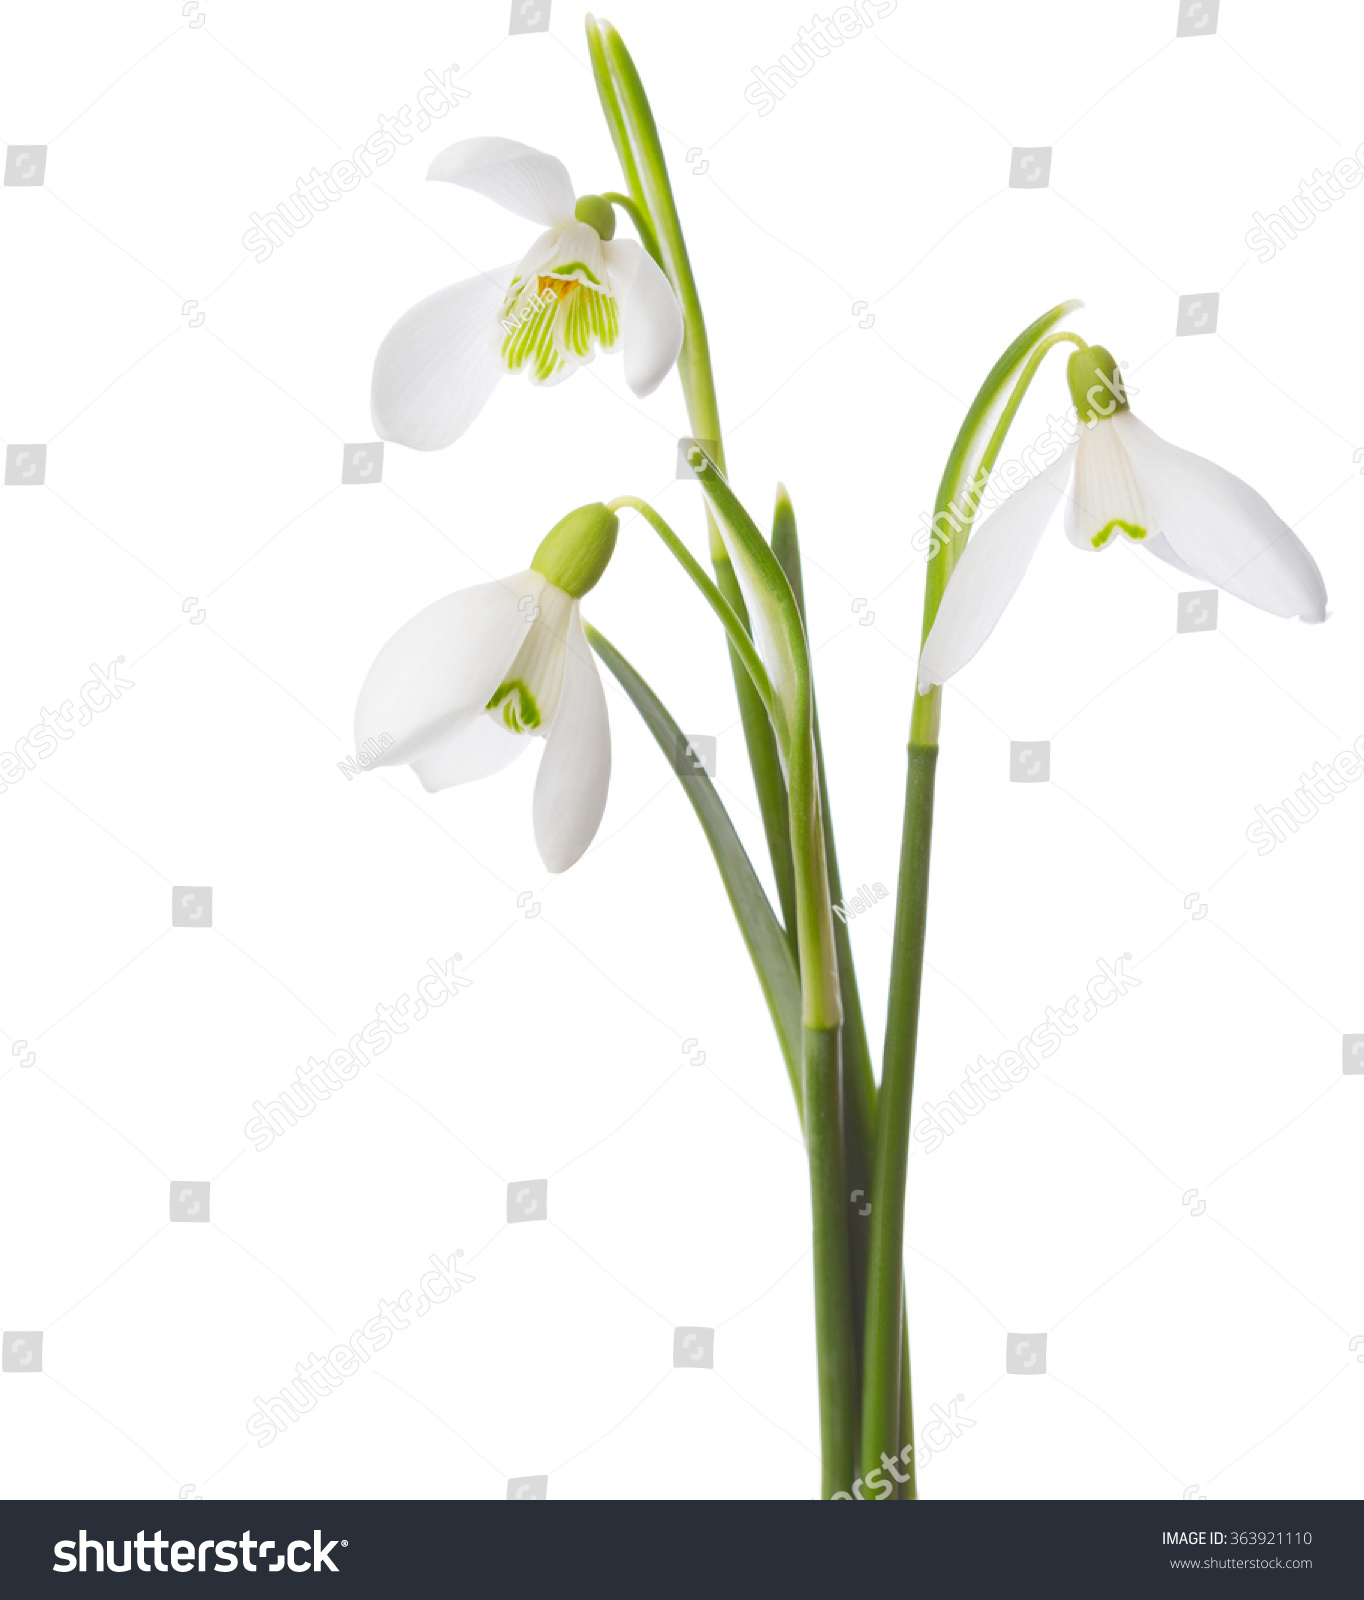 Three  snowdrop flowers isolated on white background #363921110